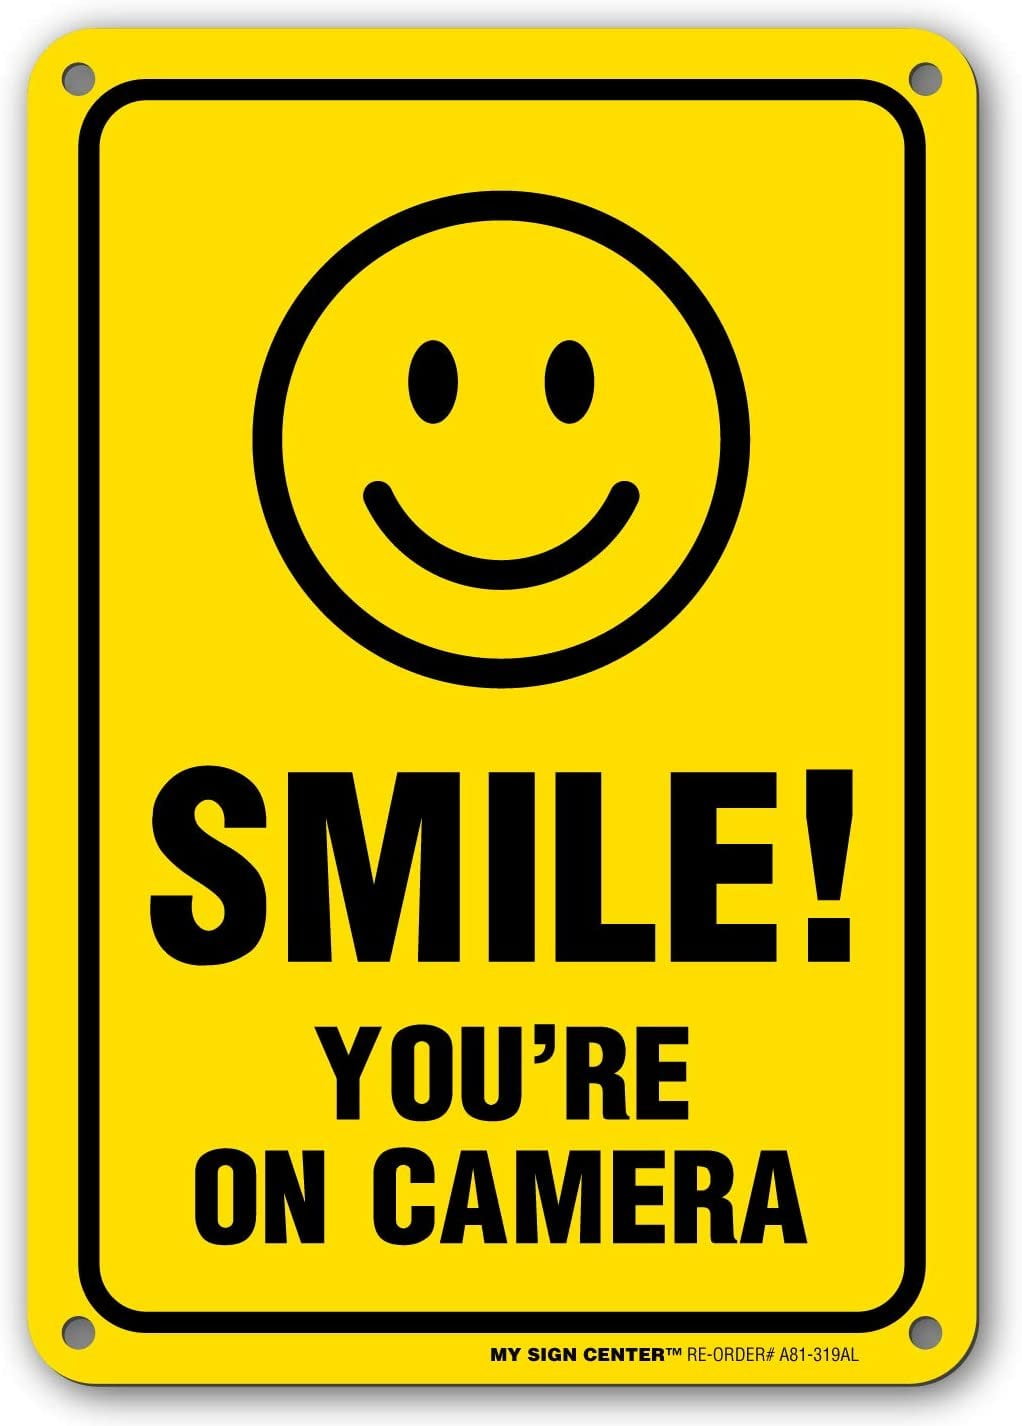 24 HOUR VIDEO SURVEILLANCE SMILE YOU'RE ON CAMERA SECURITY SIGNS 8x12   NEW 5 